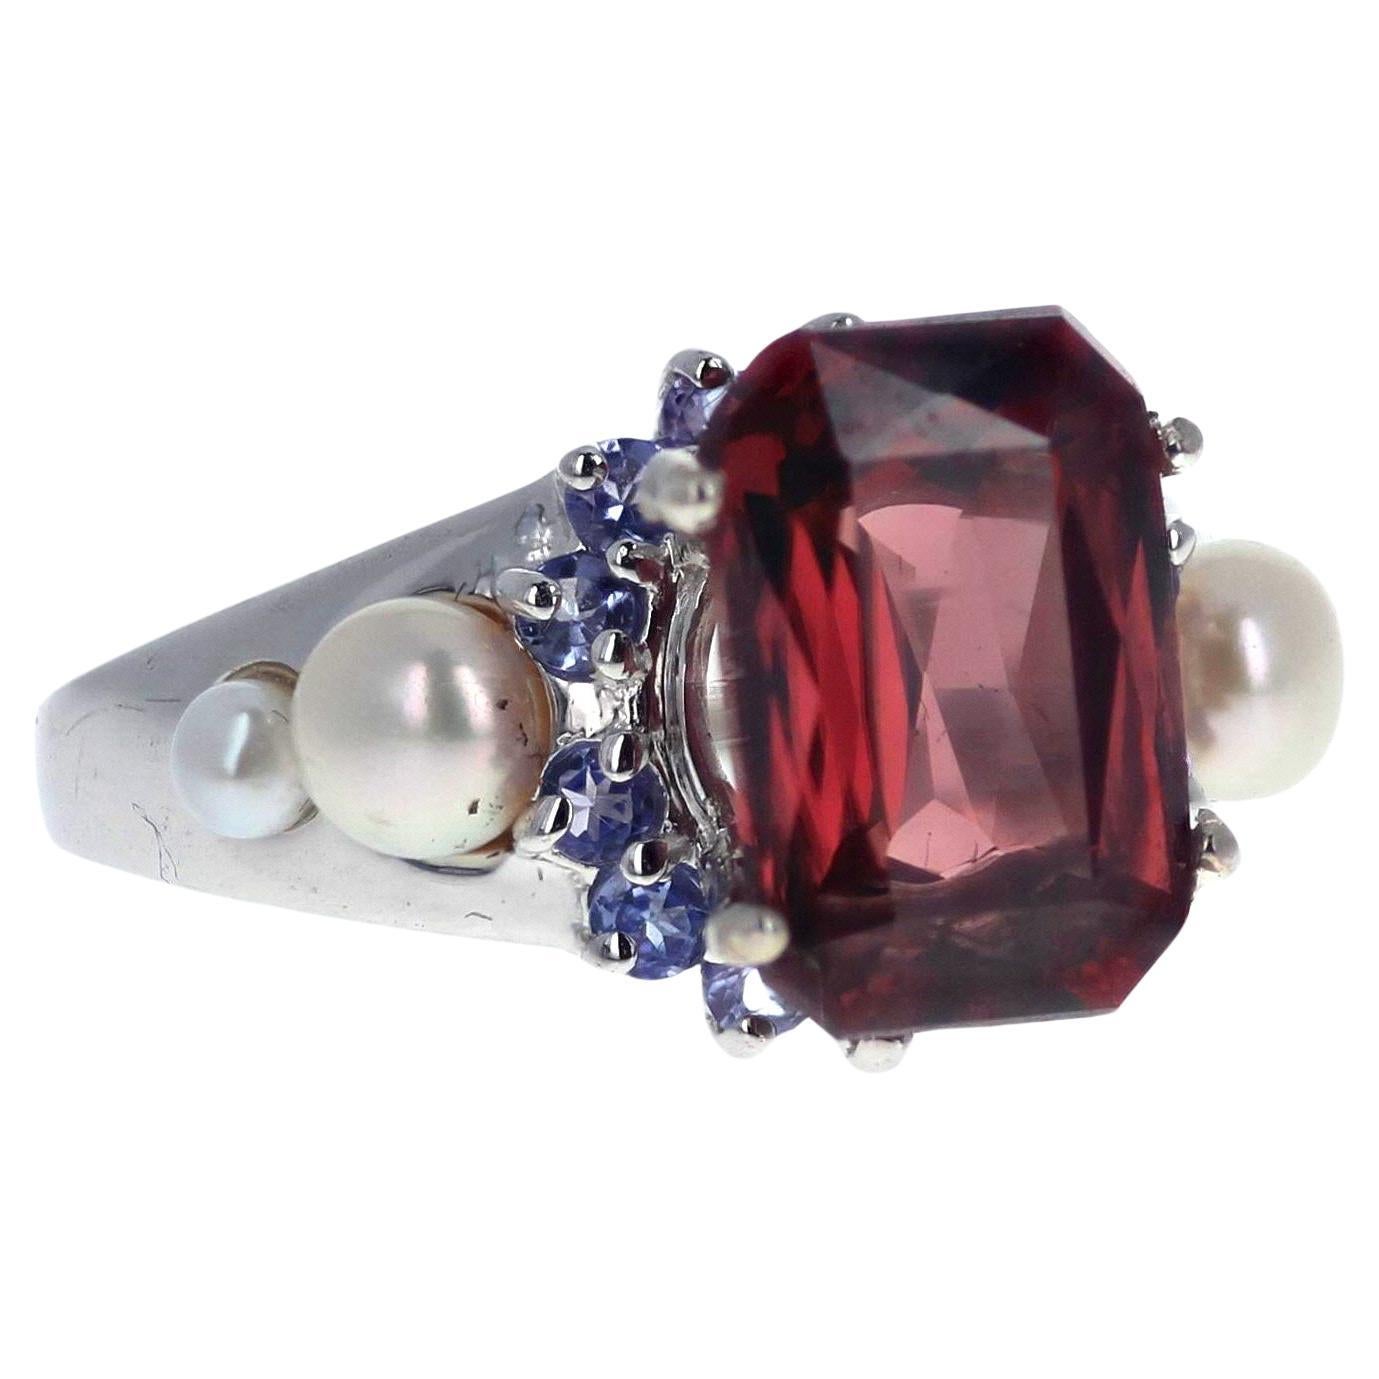 This 7.2 Carat glittering natural red Zircon measures 12 mm x 8 mm and is set in a Sterling Silver ring enhanced with blue Sapphires and white Pearls. The ring is size 7 (sizable). There are no eye visible inclusions in this magnificent rare Zircon.